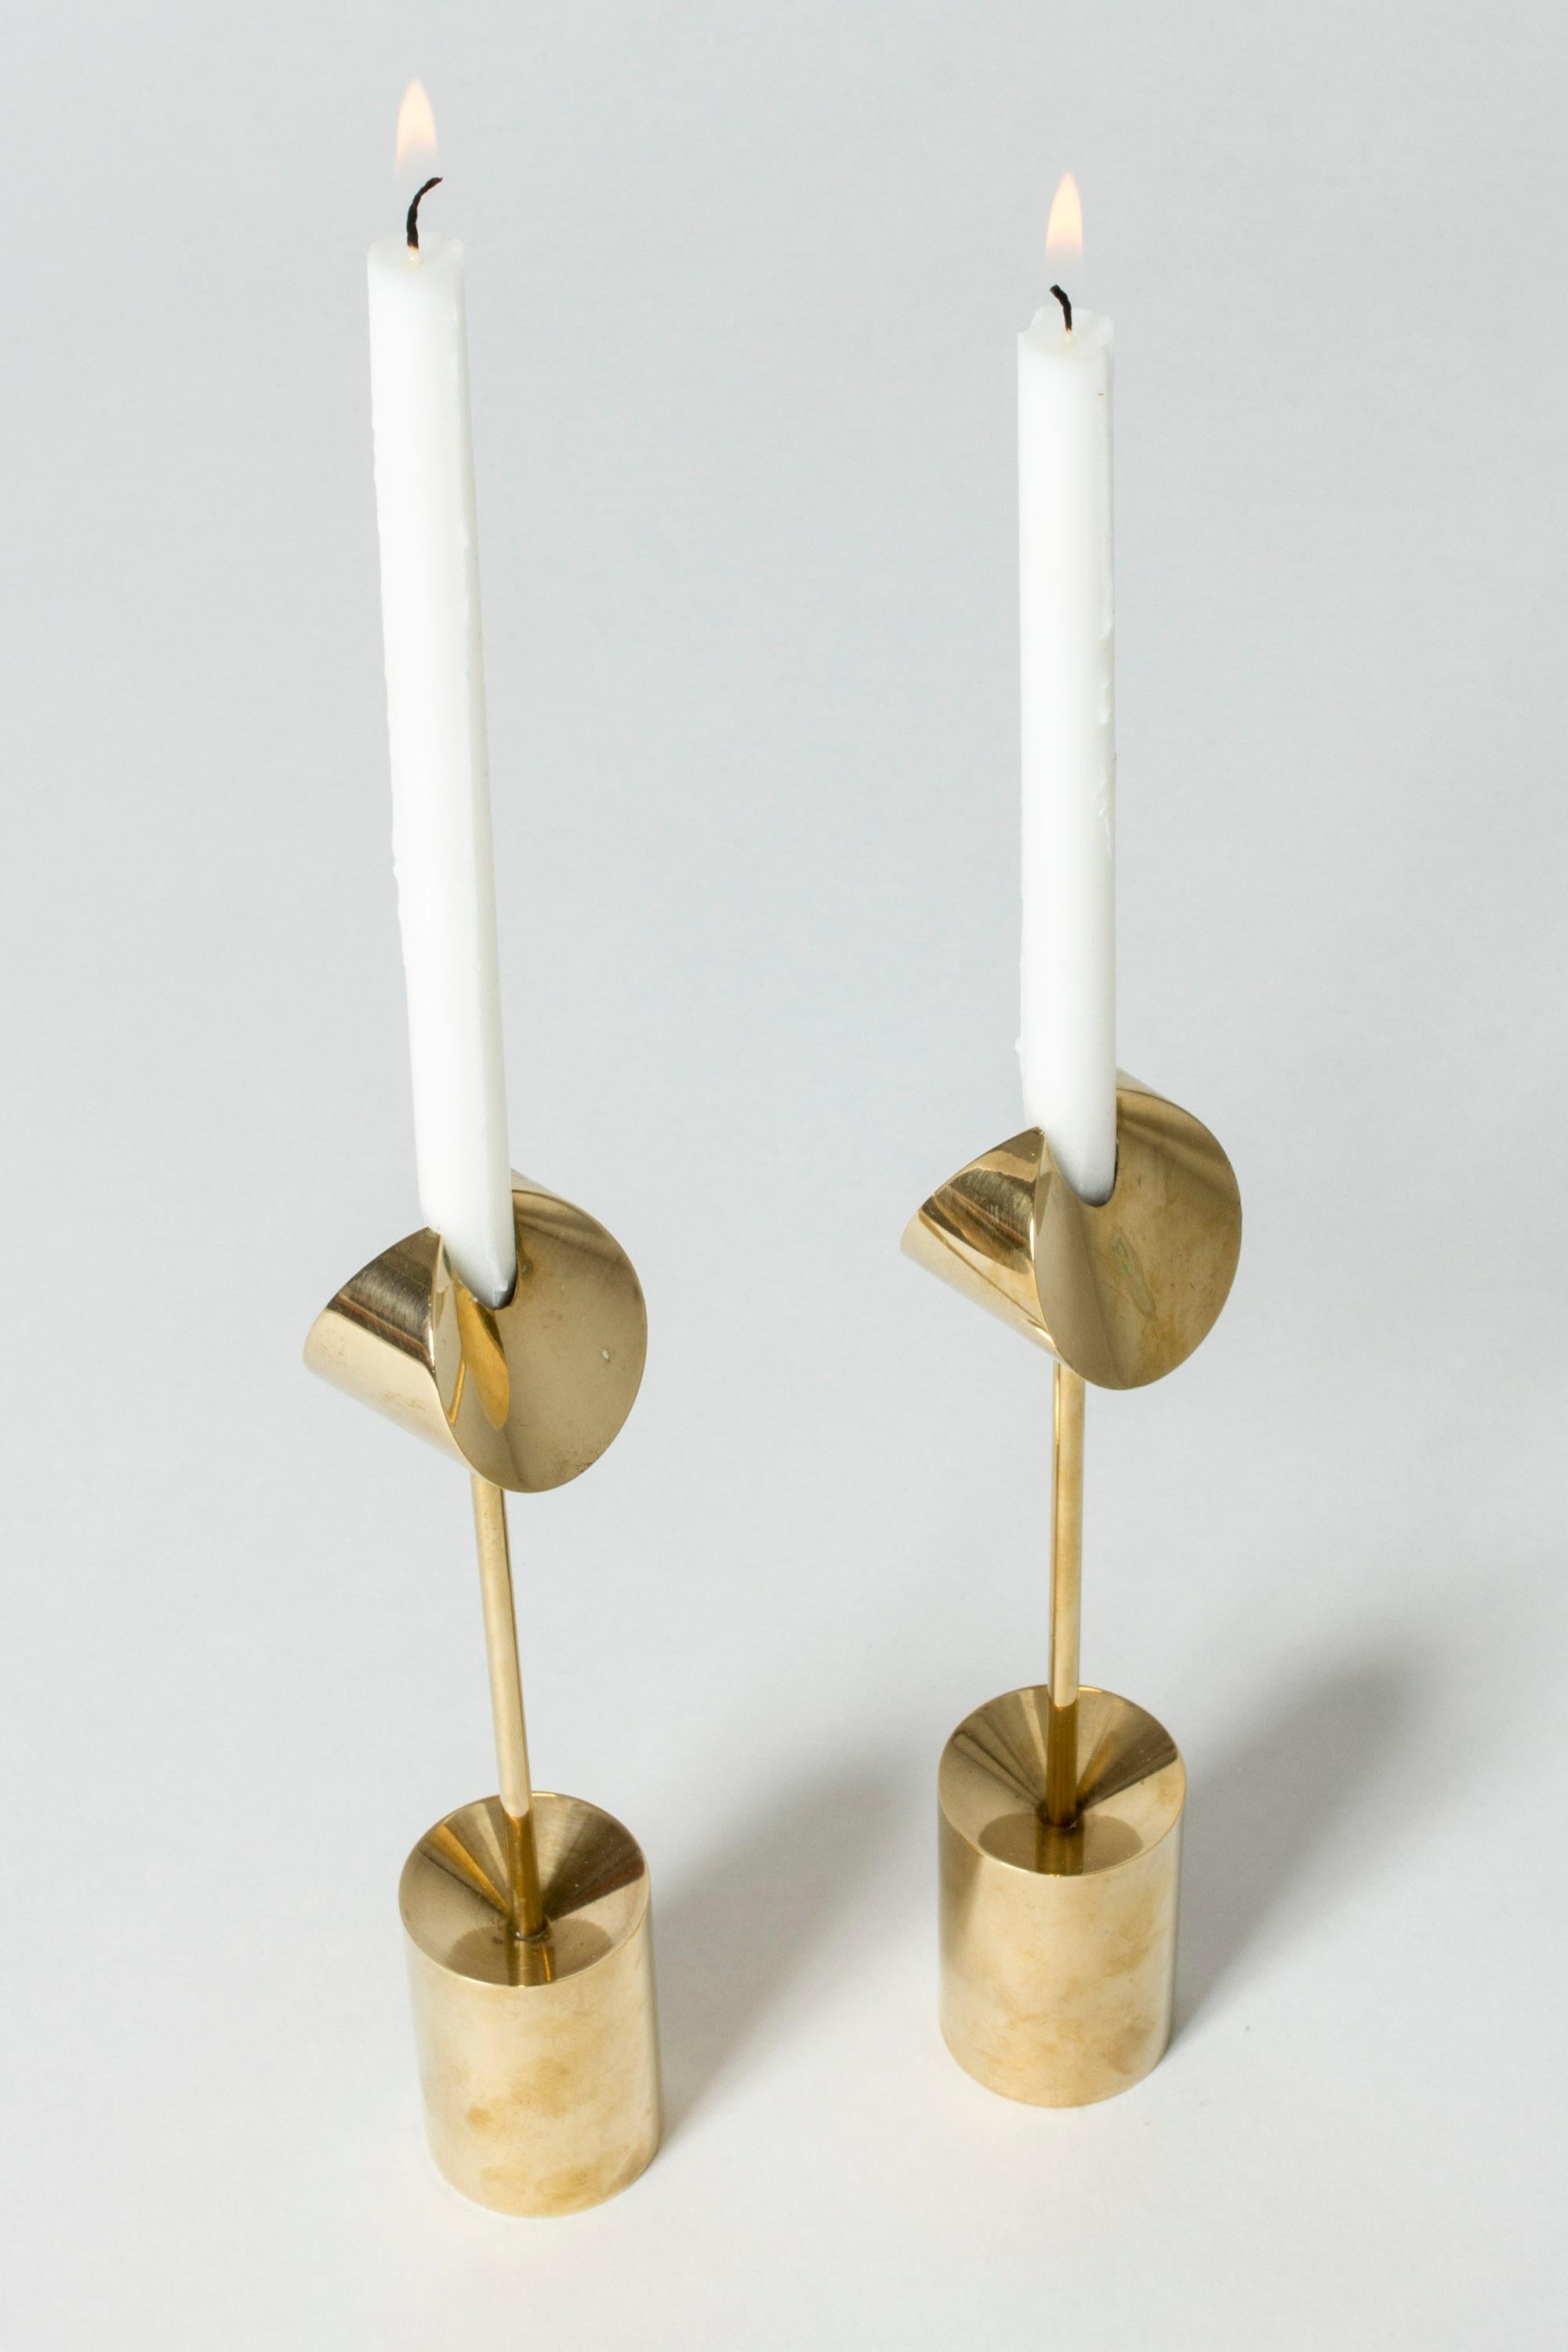 Enchanting pair of brass candlesticks by Pierre Forssell, light in their expression in a way that defies their actual heavy weight. Fit slender “Birgitta” candles, look amazing also without a candle in them.